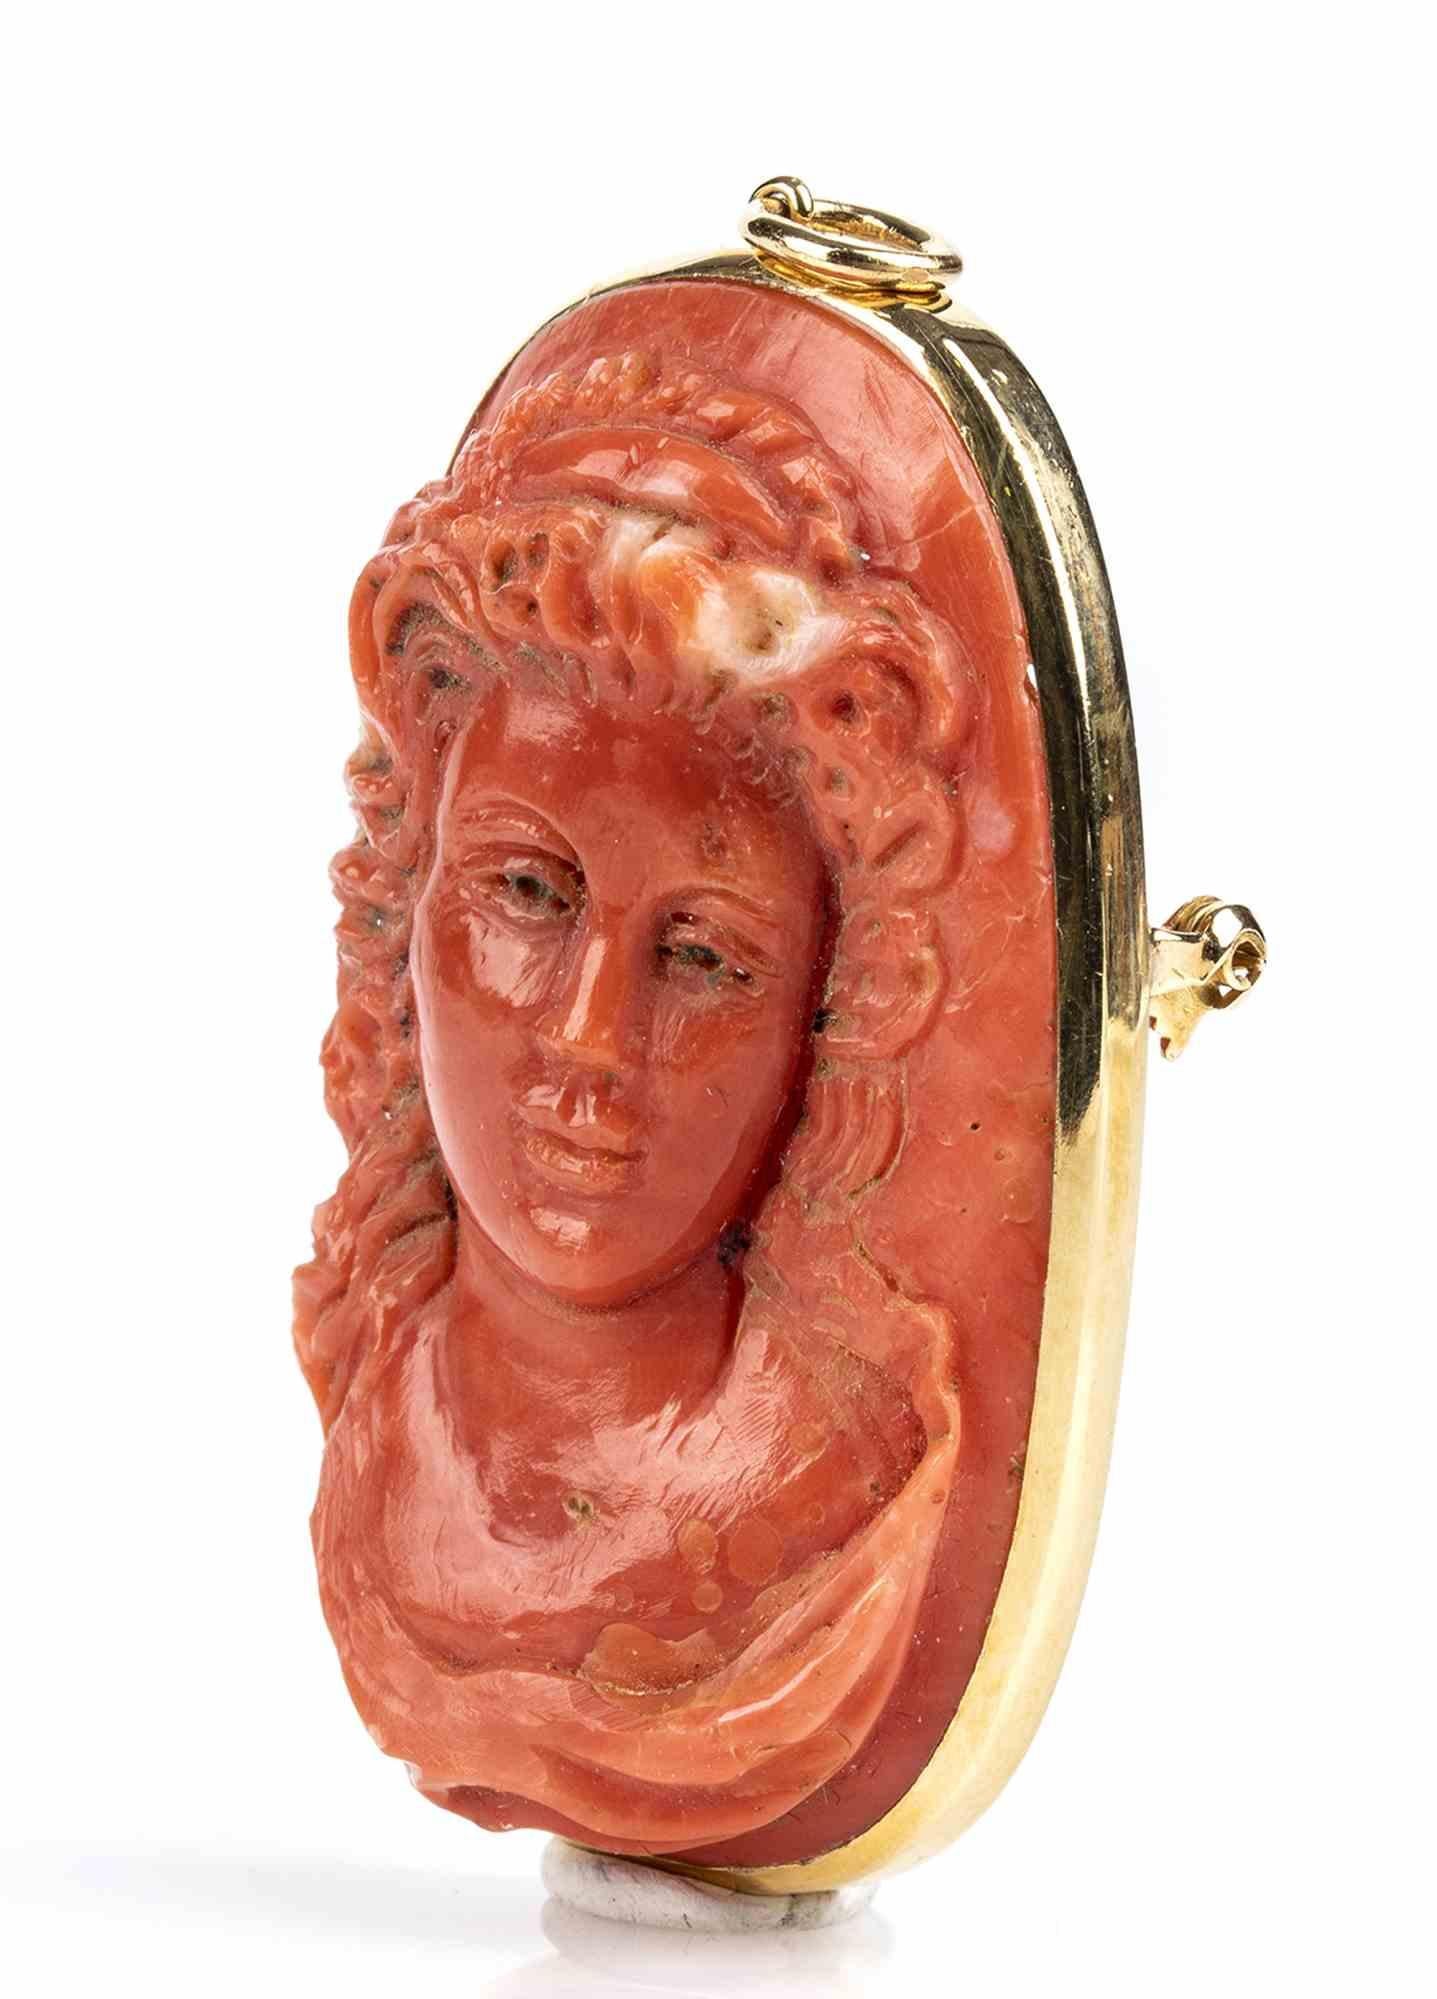 Gold and Cerasuolo Coral Cameo Pendant - by G.Ganeri

18k yellow gold, set with a Cerasuolo coral (corallium elatius) cameo depicting a female face. Signed 